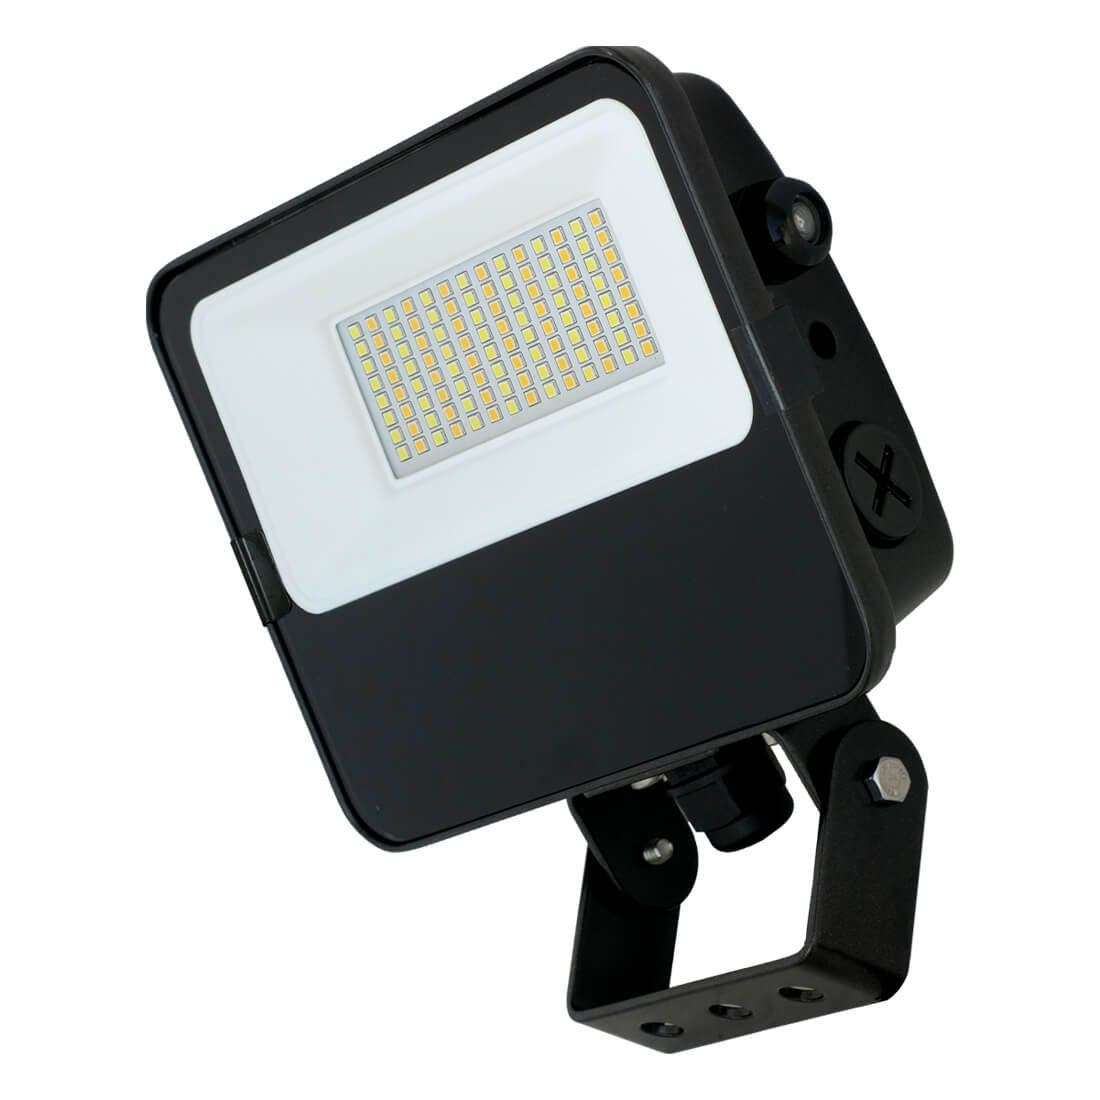 C-Lite LED Flood Light w/ Adjustable Yoke Mount | CCT & Wattage Selectable  | Photocell Included | C-FL-A-FLW Series | Up to 5200 Lumens | Dark Bronze